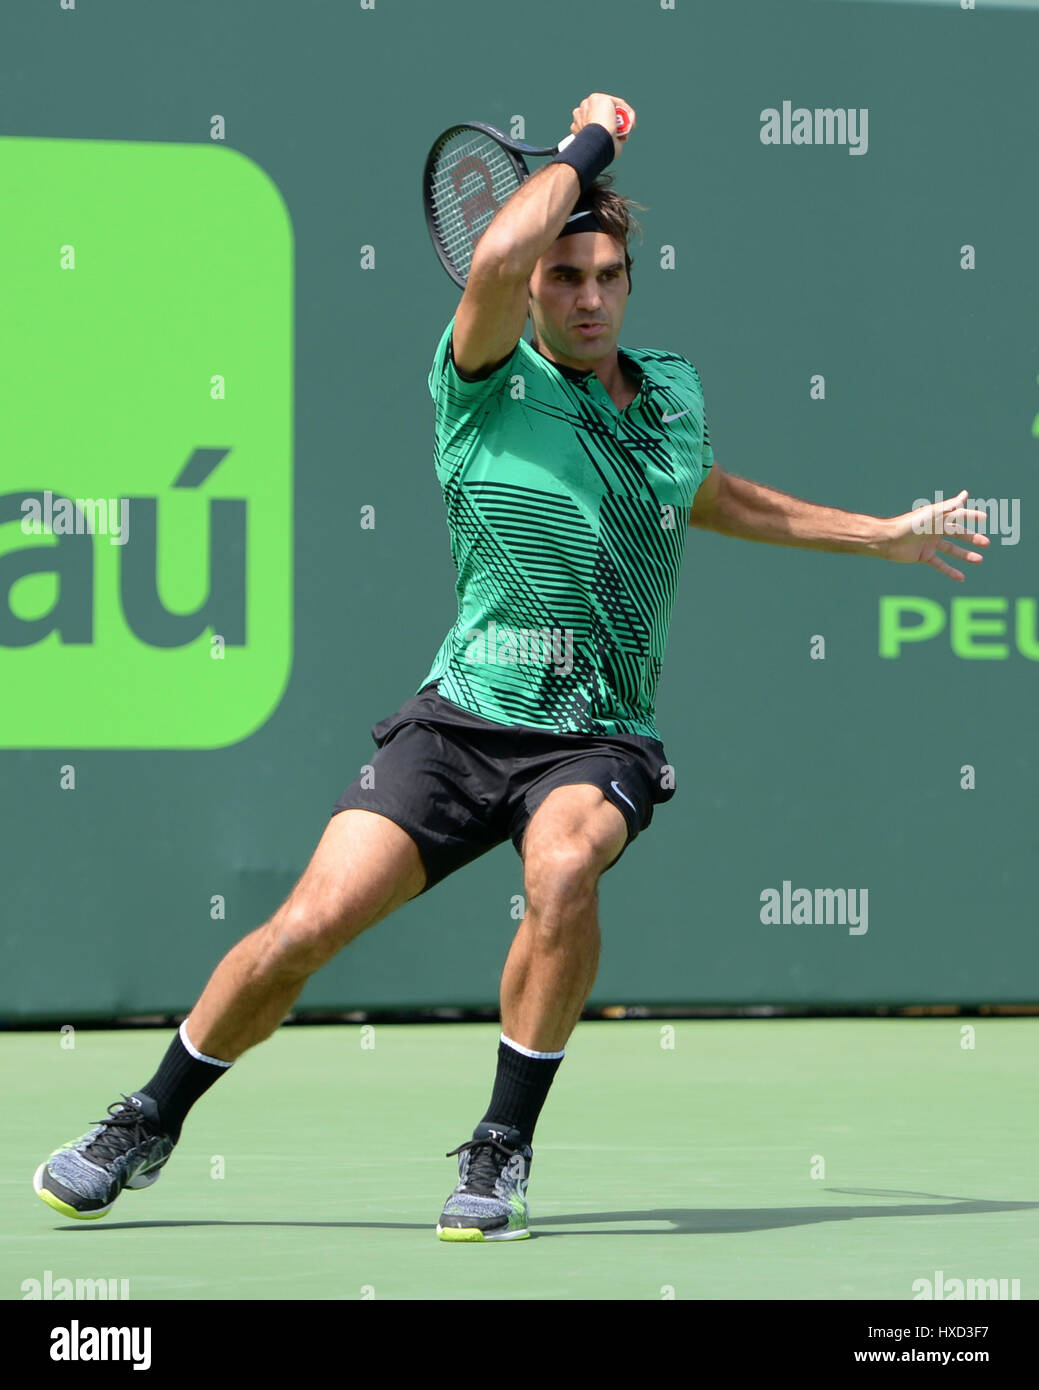 Miami, Key Biscayne, Florida, USA. 27th Mar, 2017. Roger Federer (SUI)  defeats Juan Martin del Potro (ARG) by 6-3, 6-4, at the Miami Open being  played at Crandon Park Tennis Center in